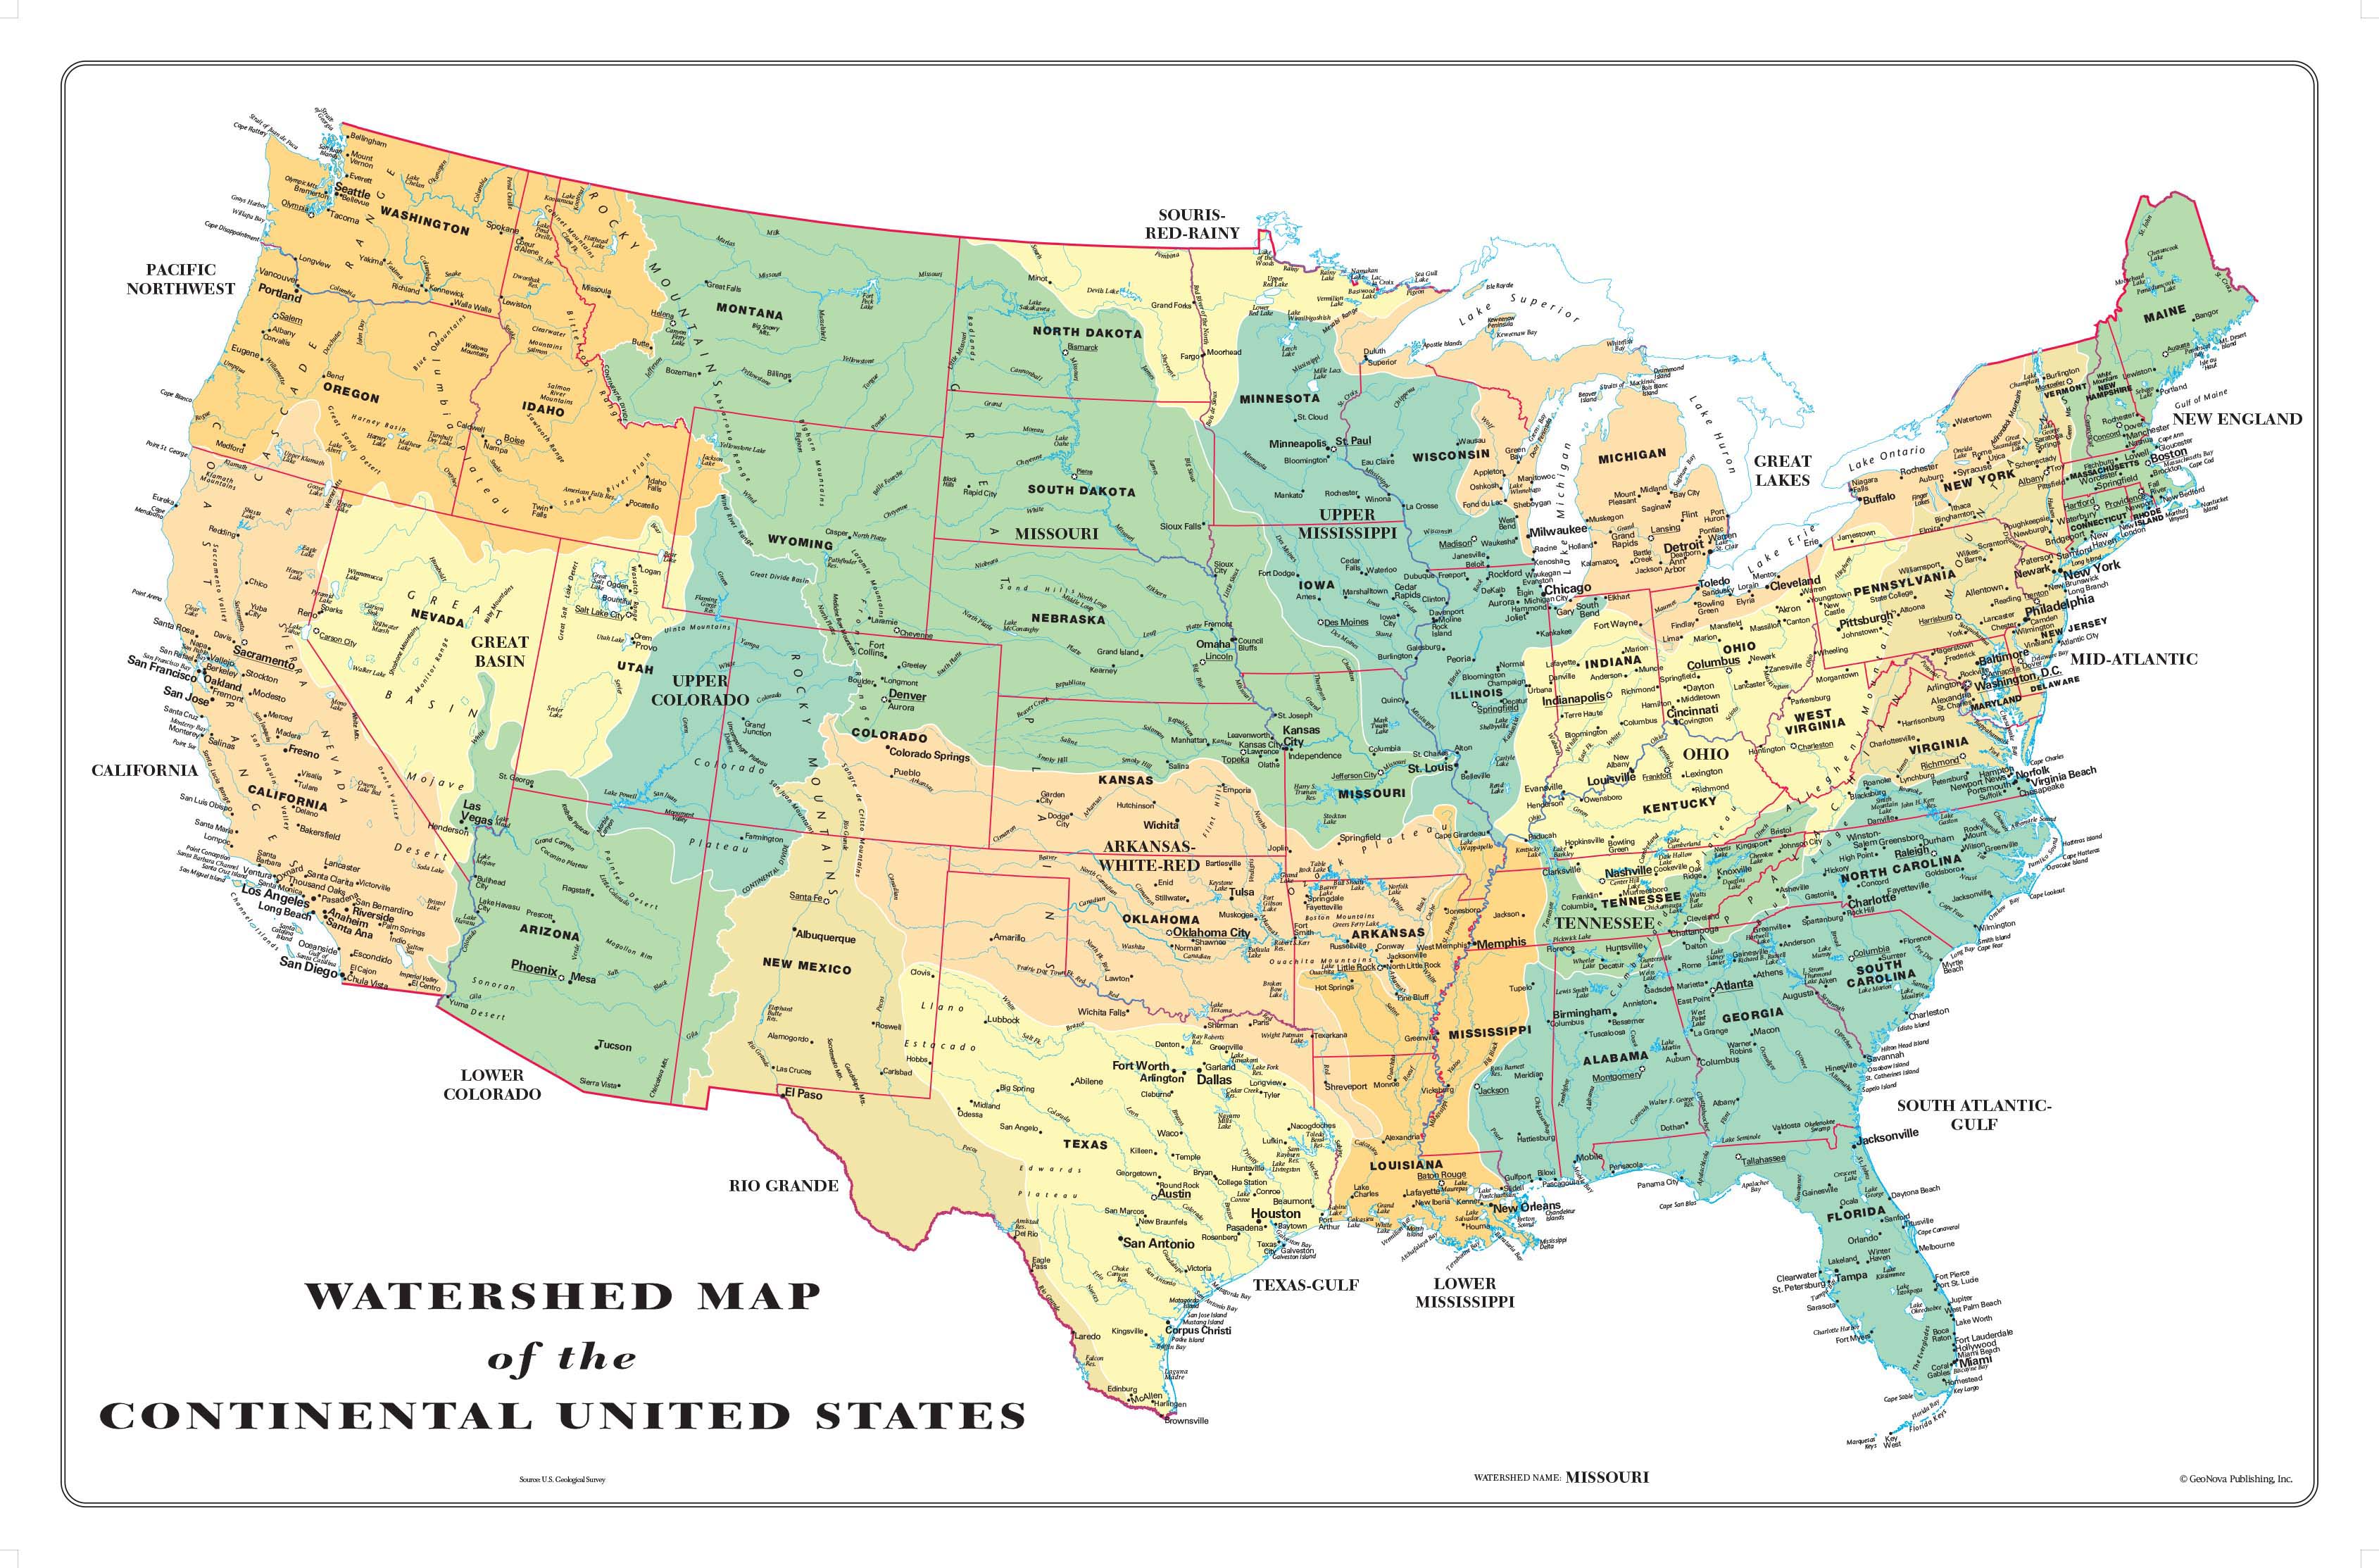 Watersheds Of North America Wall Map This Map Shows Watershed Basins ...